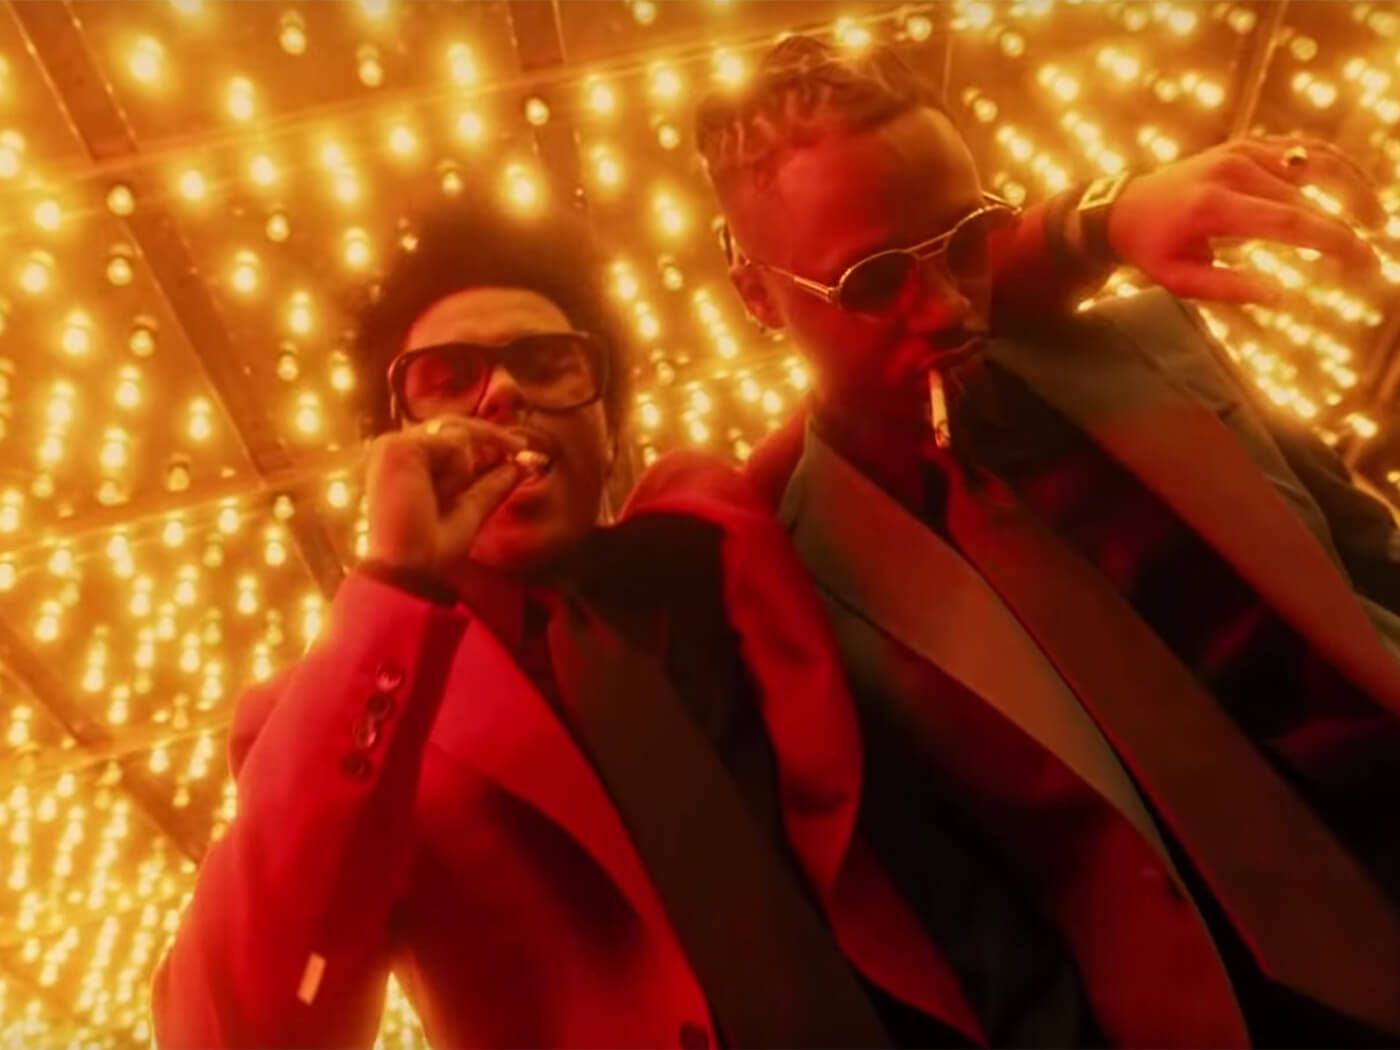 The Weeknd, Metro Boomin have a wild night in “Heartless” video